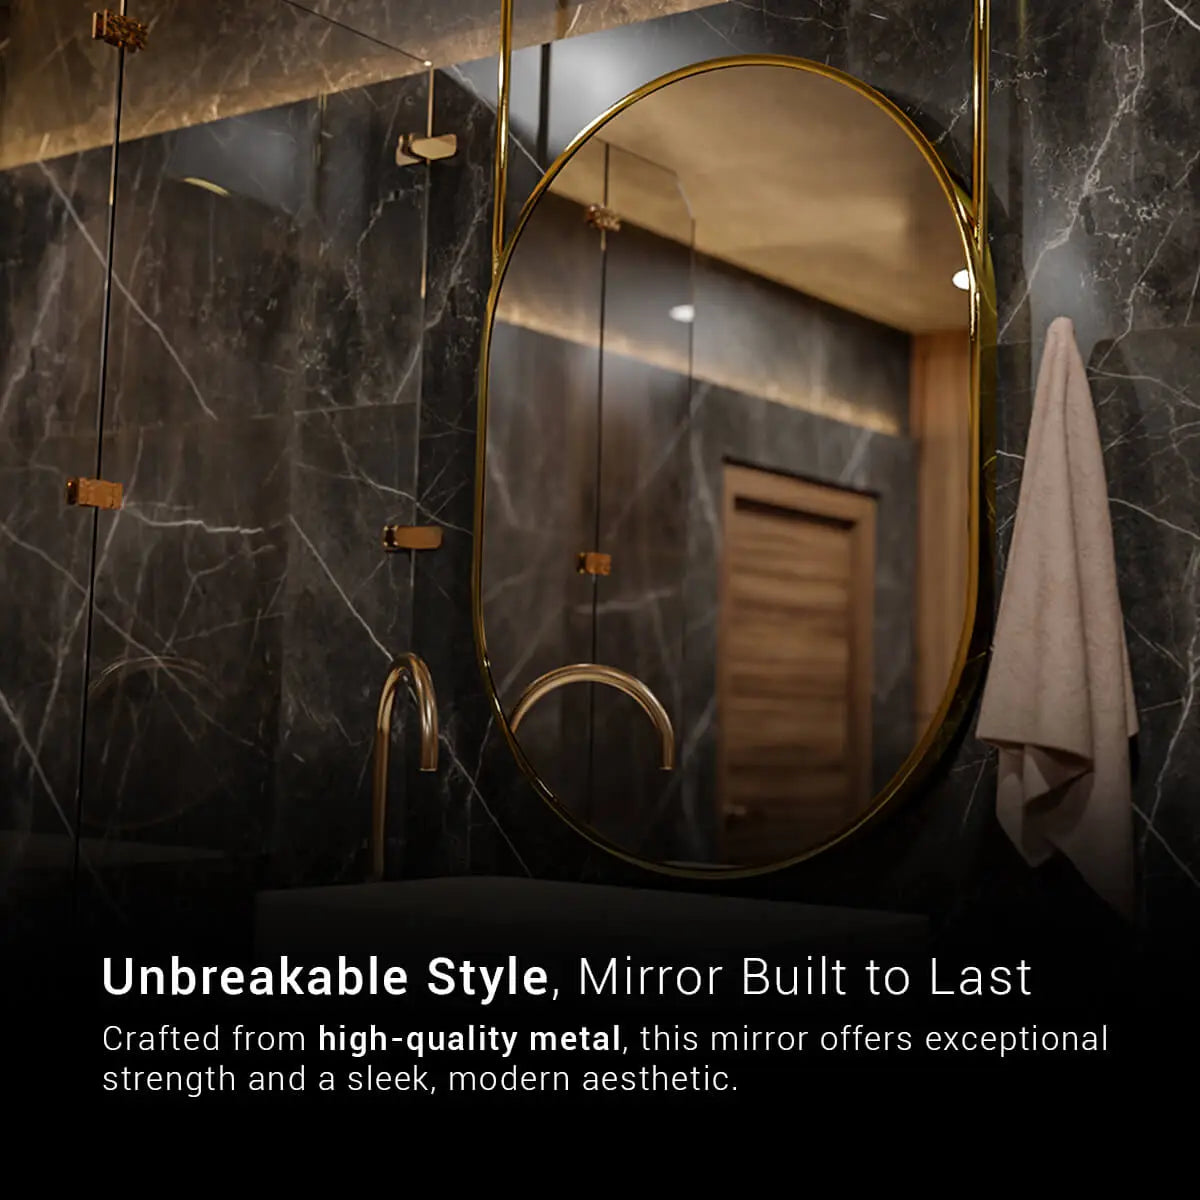 A bathroom vanity set with a gold-framed mirror. The mirror is mounted on the wall using the pipes that hold on to the roof, above a white ceramic sink with a polished chrome faucet. There is a white towel hanging from a rack on the right side of the image.